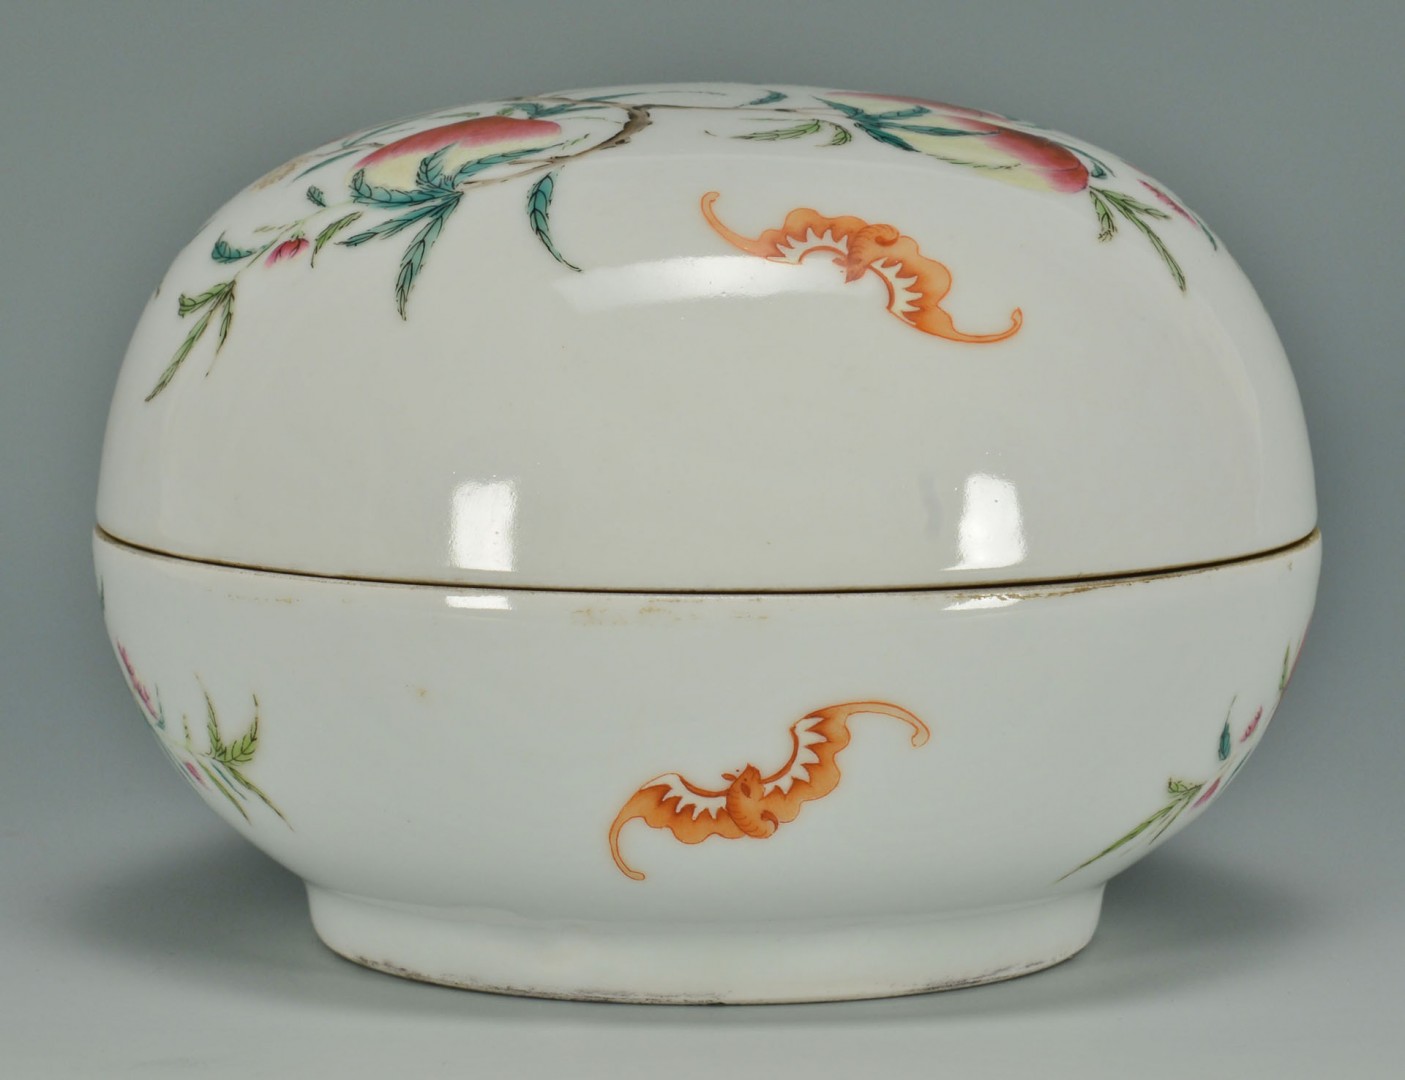 Lot 8: Chinese Porcelain Famille Rose Penghe Box